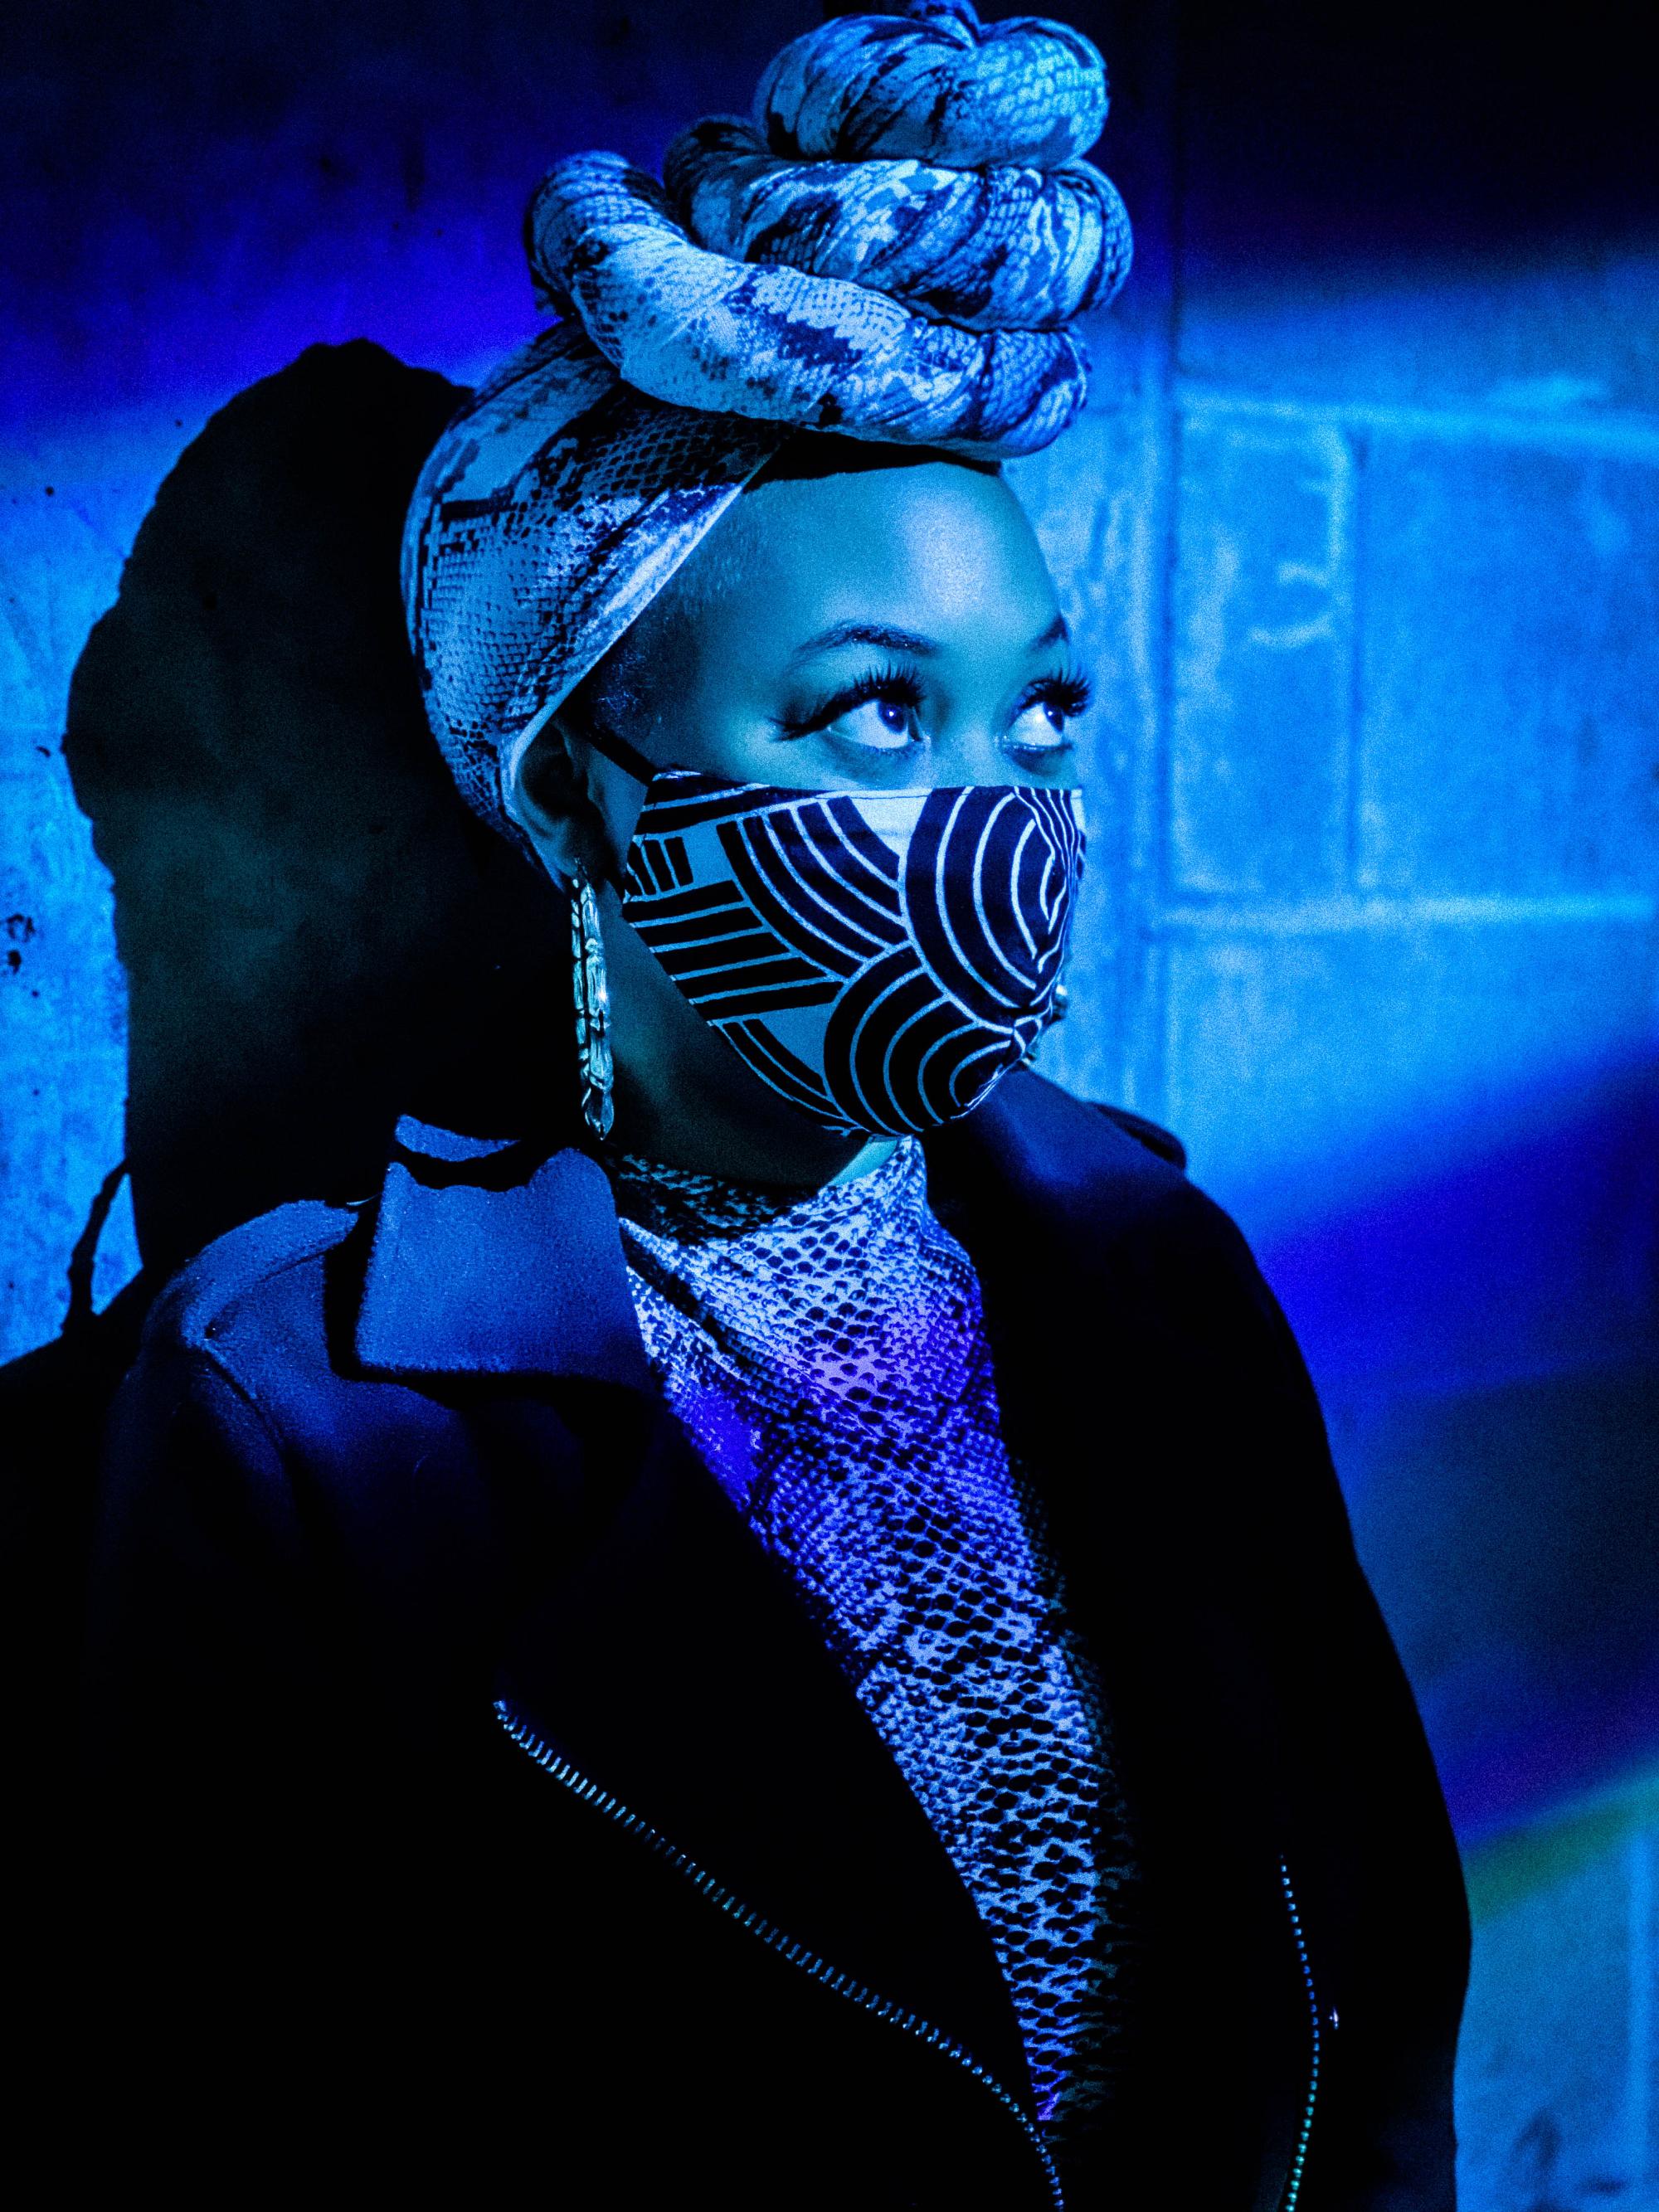 actress wearing a knotted wrap around her head and a mask washed in blue light